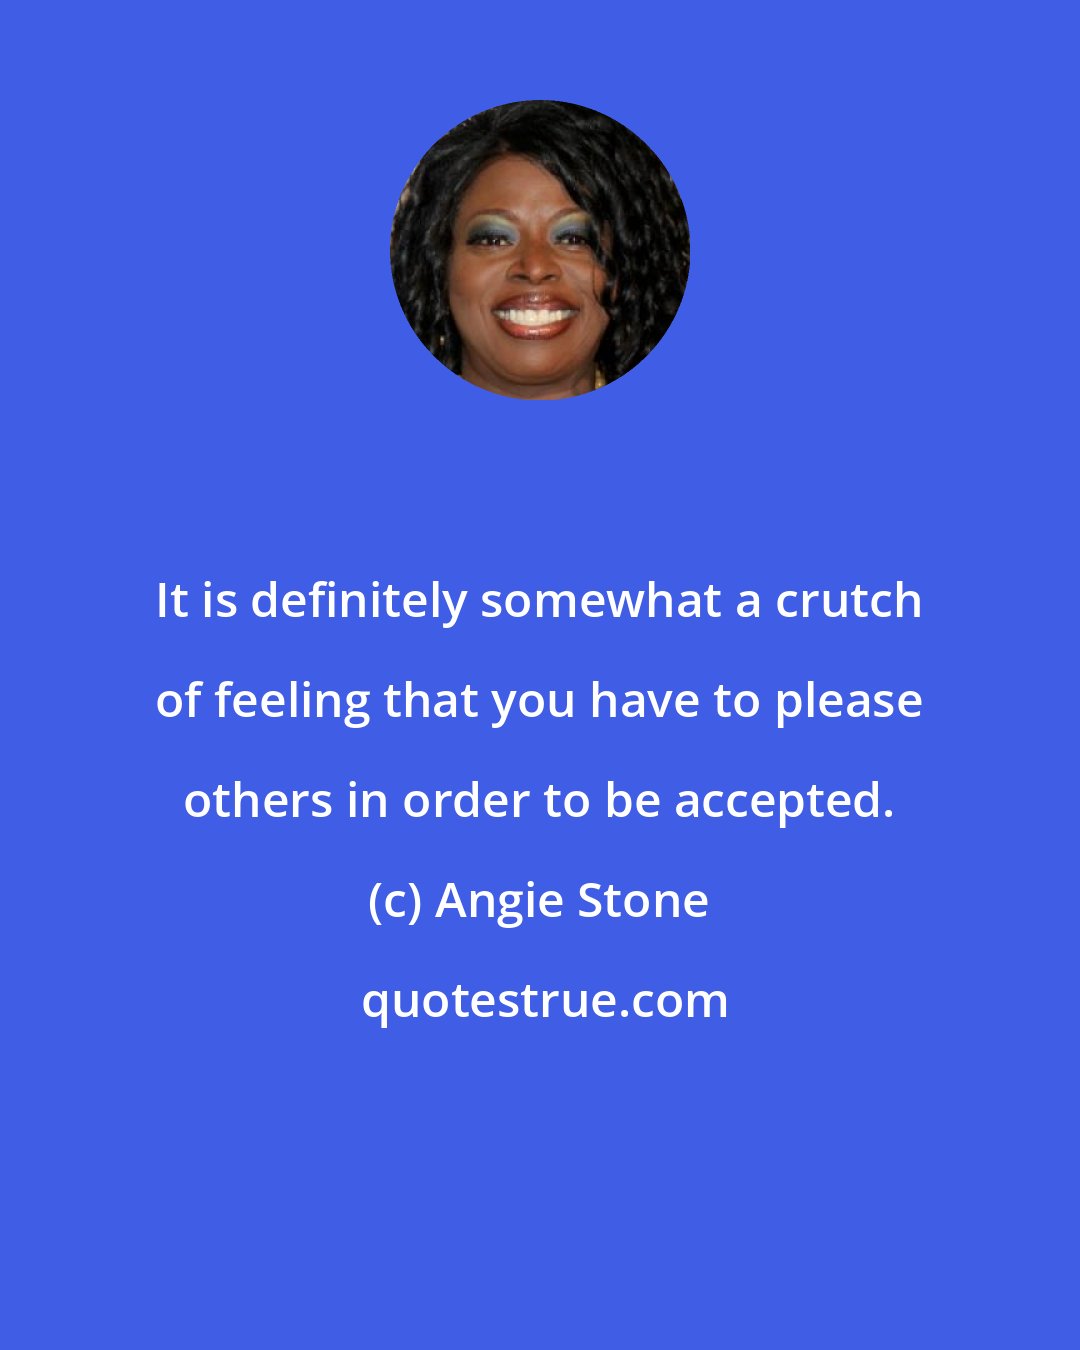 Angie Stone: It is definitely somewhat a crutch of feeling that you have to please others in order to be accepted.